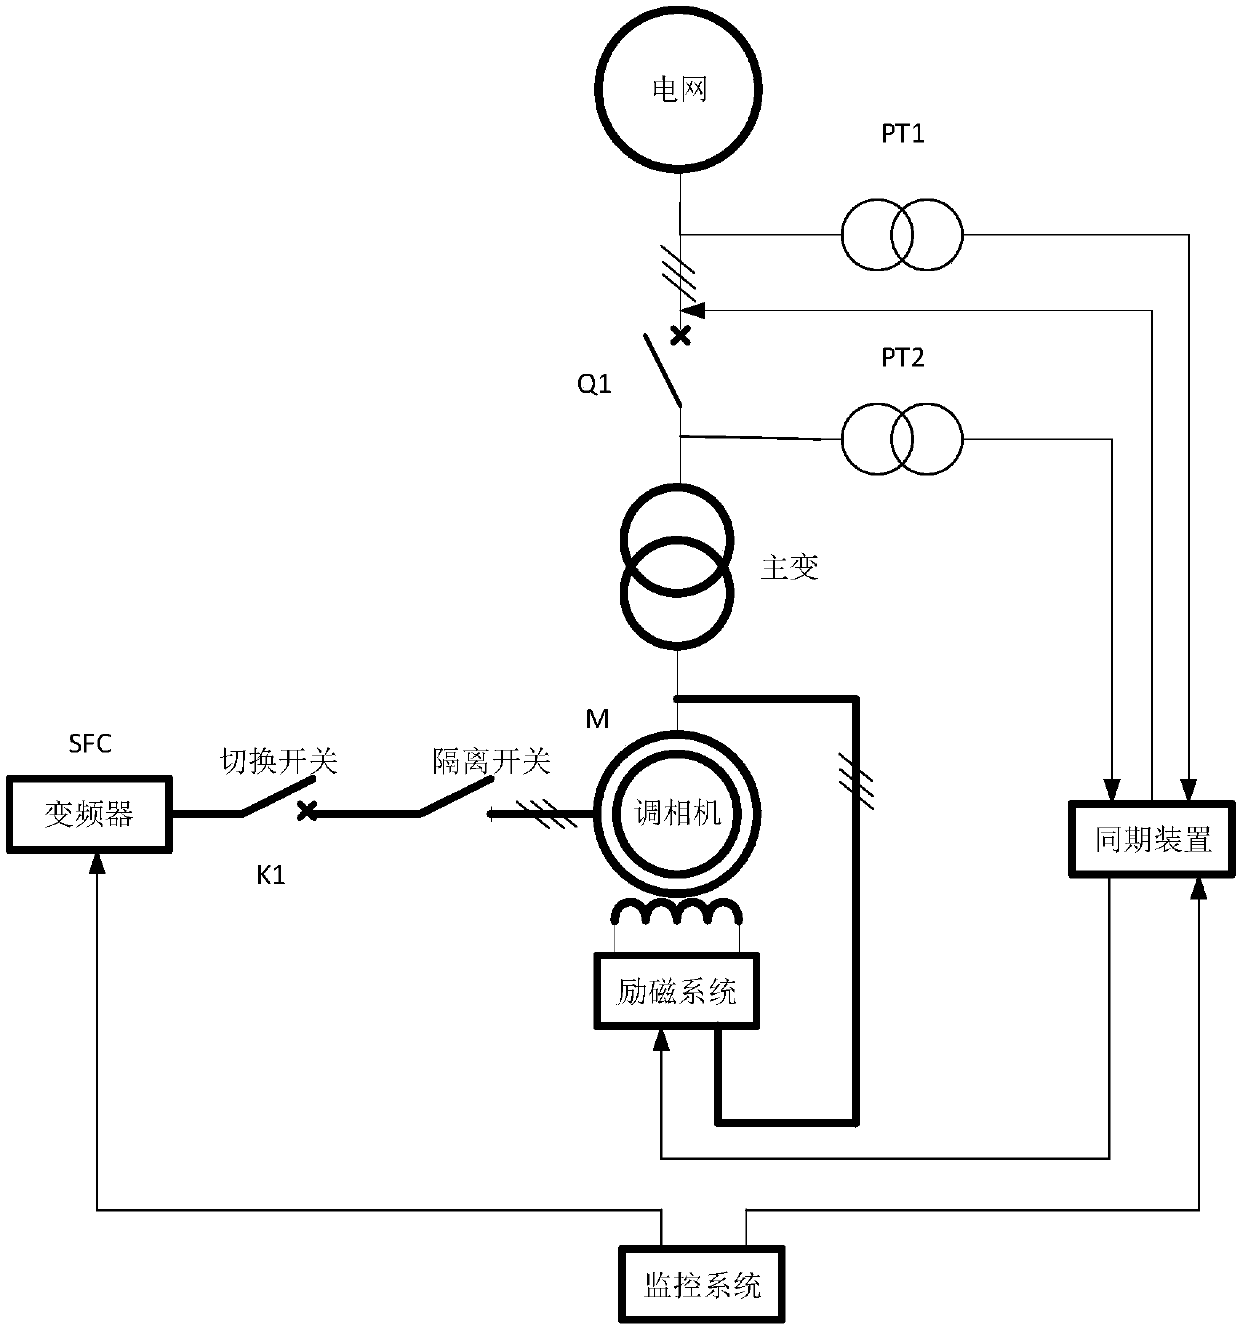 A method for running-down simultaneous grid connection of large synchronous camera group